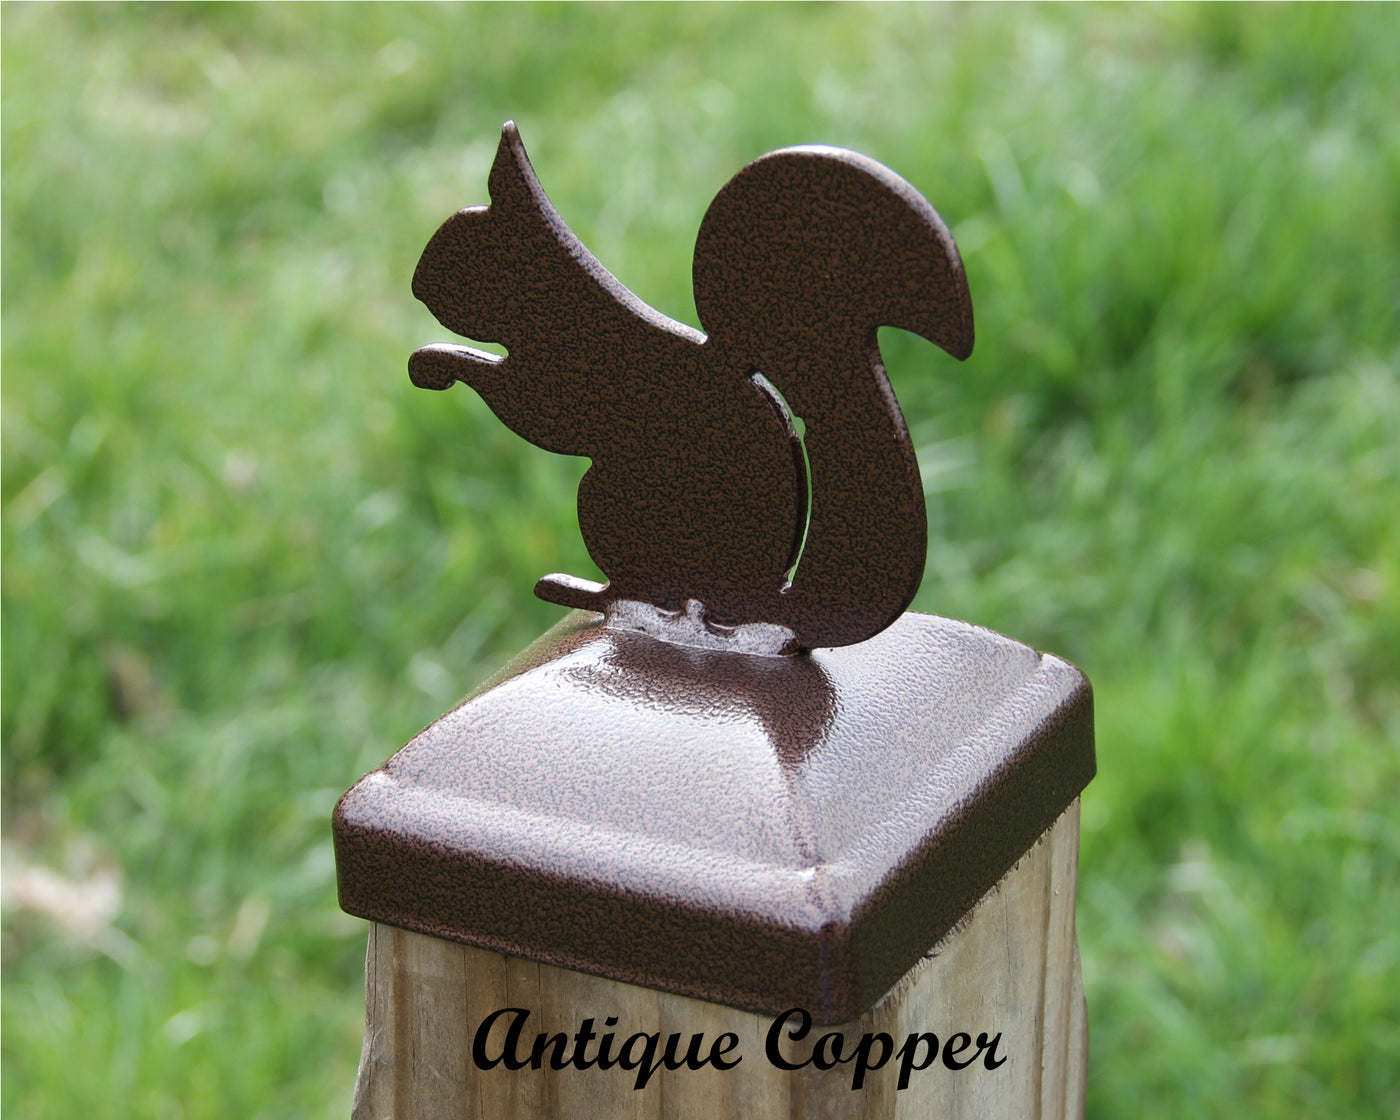 4X4 Squirrel Post Cap - Madison Iron and Wood - Post Cap - metal outdoor decor - Steel deocrations - american made products - veteran owned business products - fencing decorations - fencing supplies - custom wall decorations - personalized wall signs - steel - decorative post caps - steel post caps - metal post caps - brackets - structural brackets - home improvement - easter - easter decorations - easter gift - easter yard decor